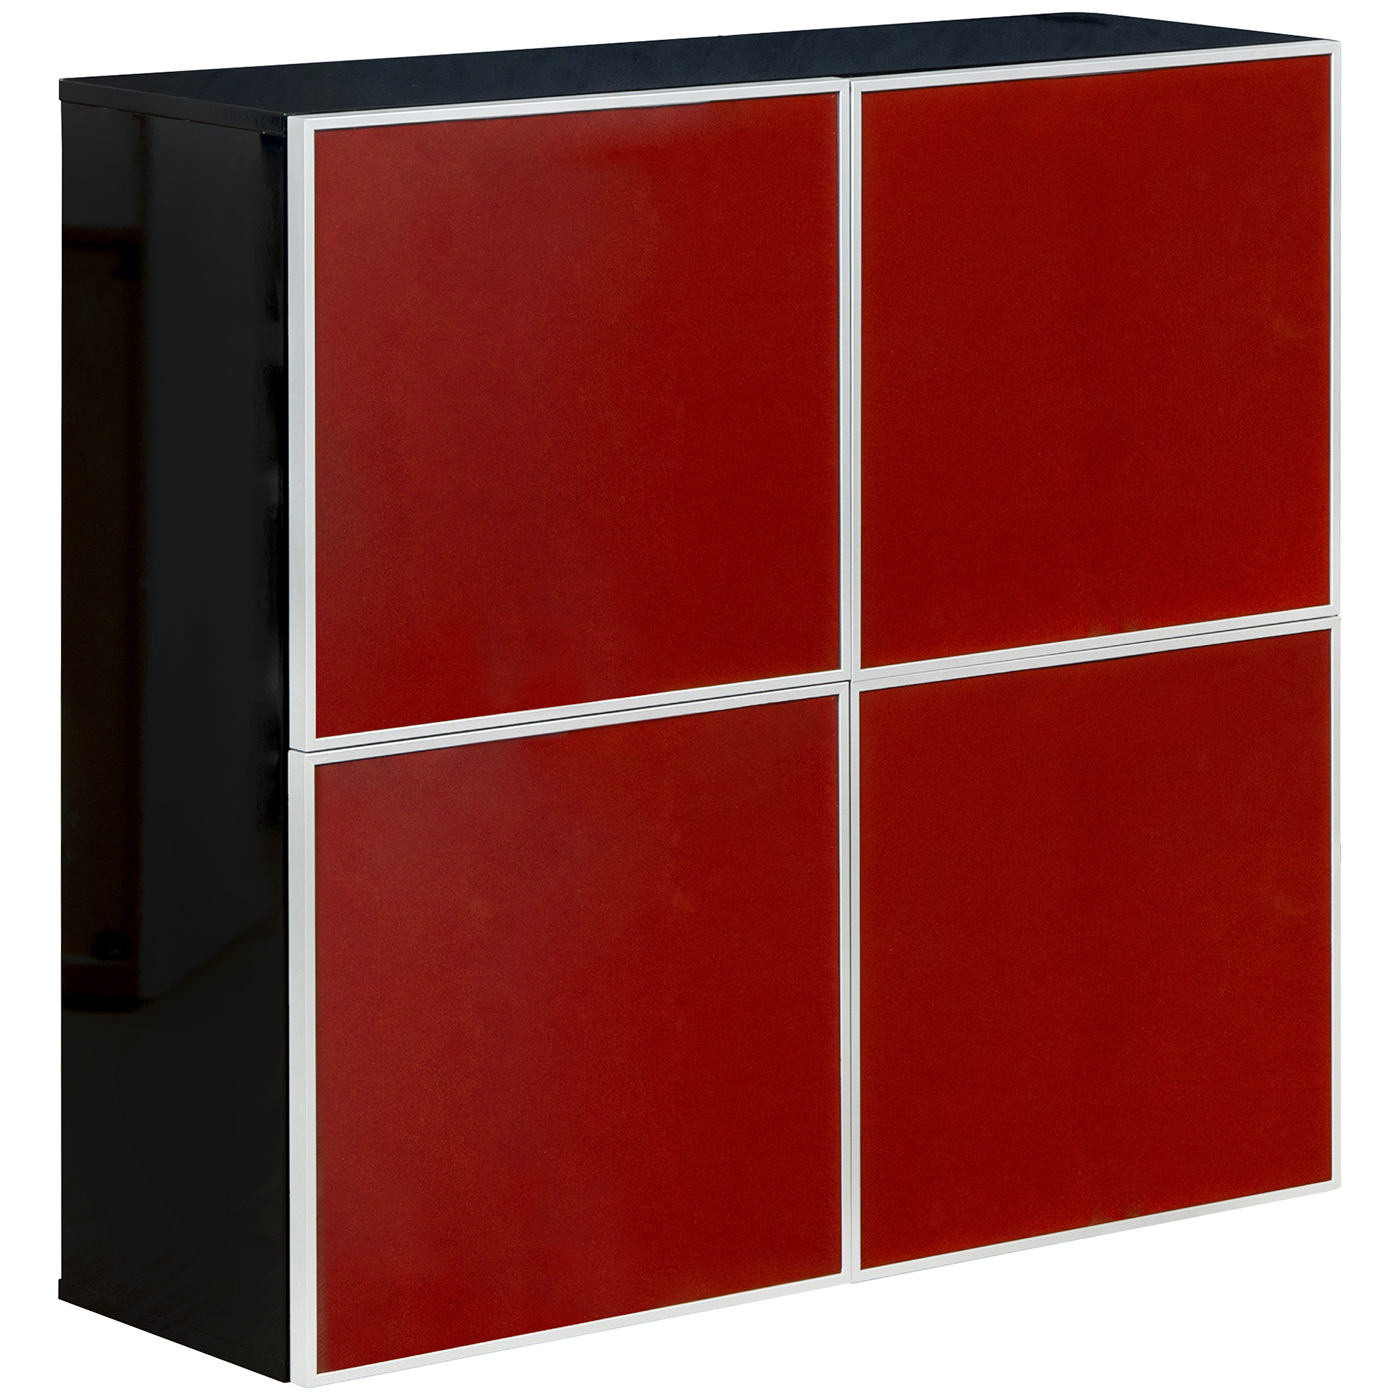 CI 1528 0020 – Set Of 2 Glass Doors Red142Shelf 090 For Wall Black (2)